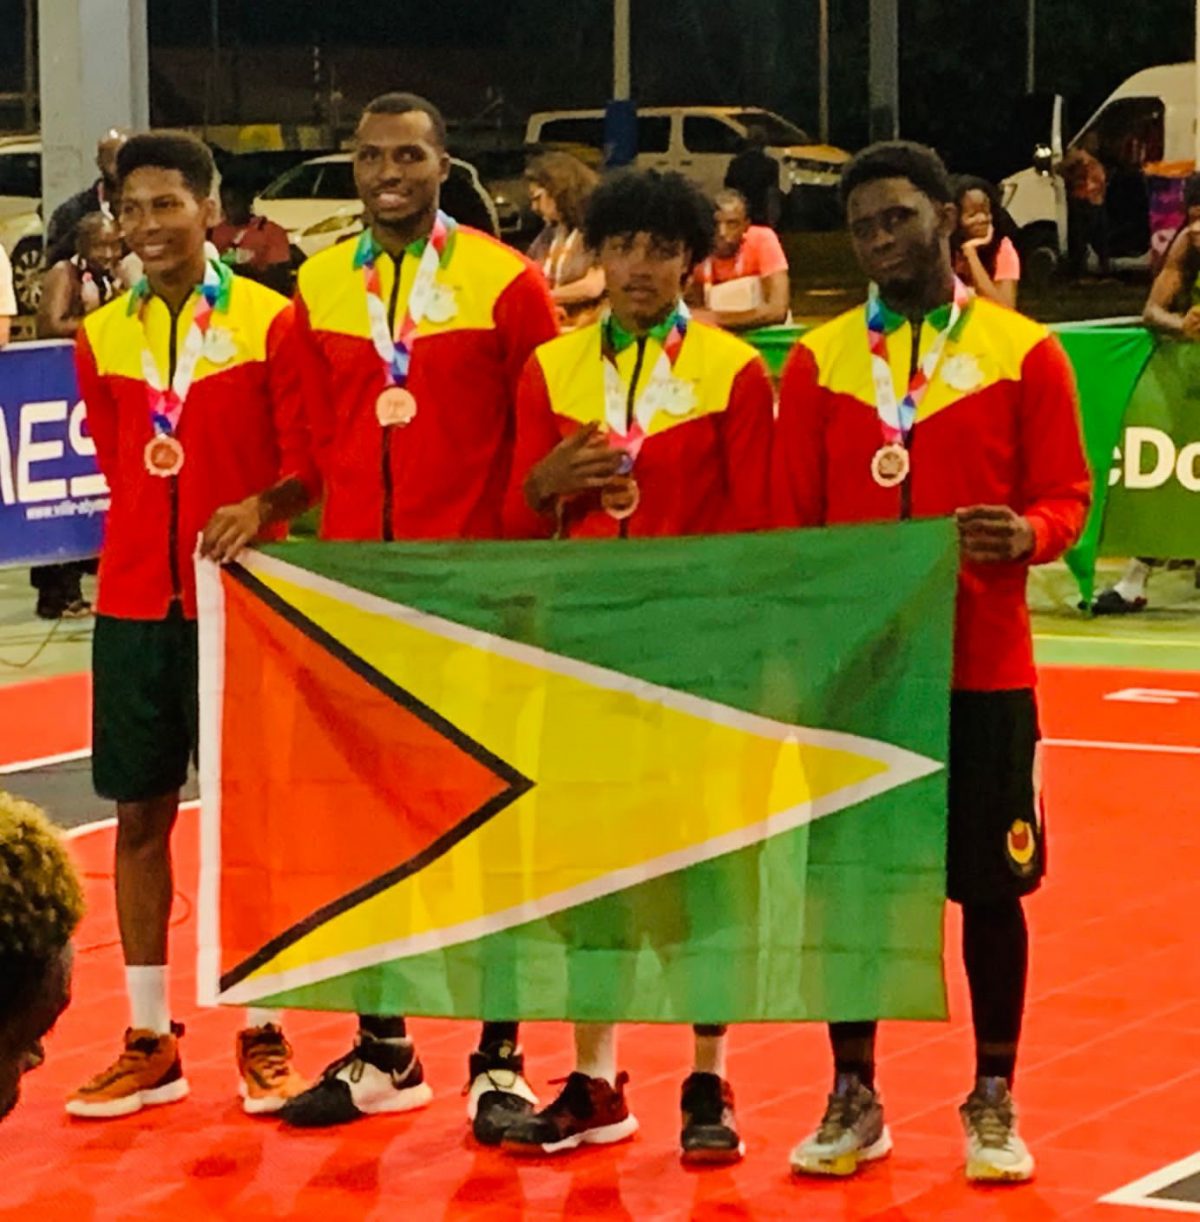 Some members of Team Guyana with their medals